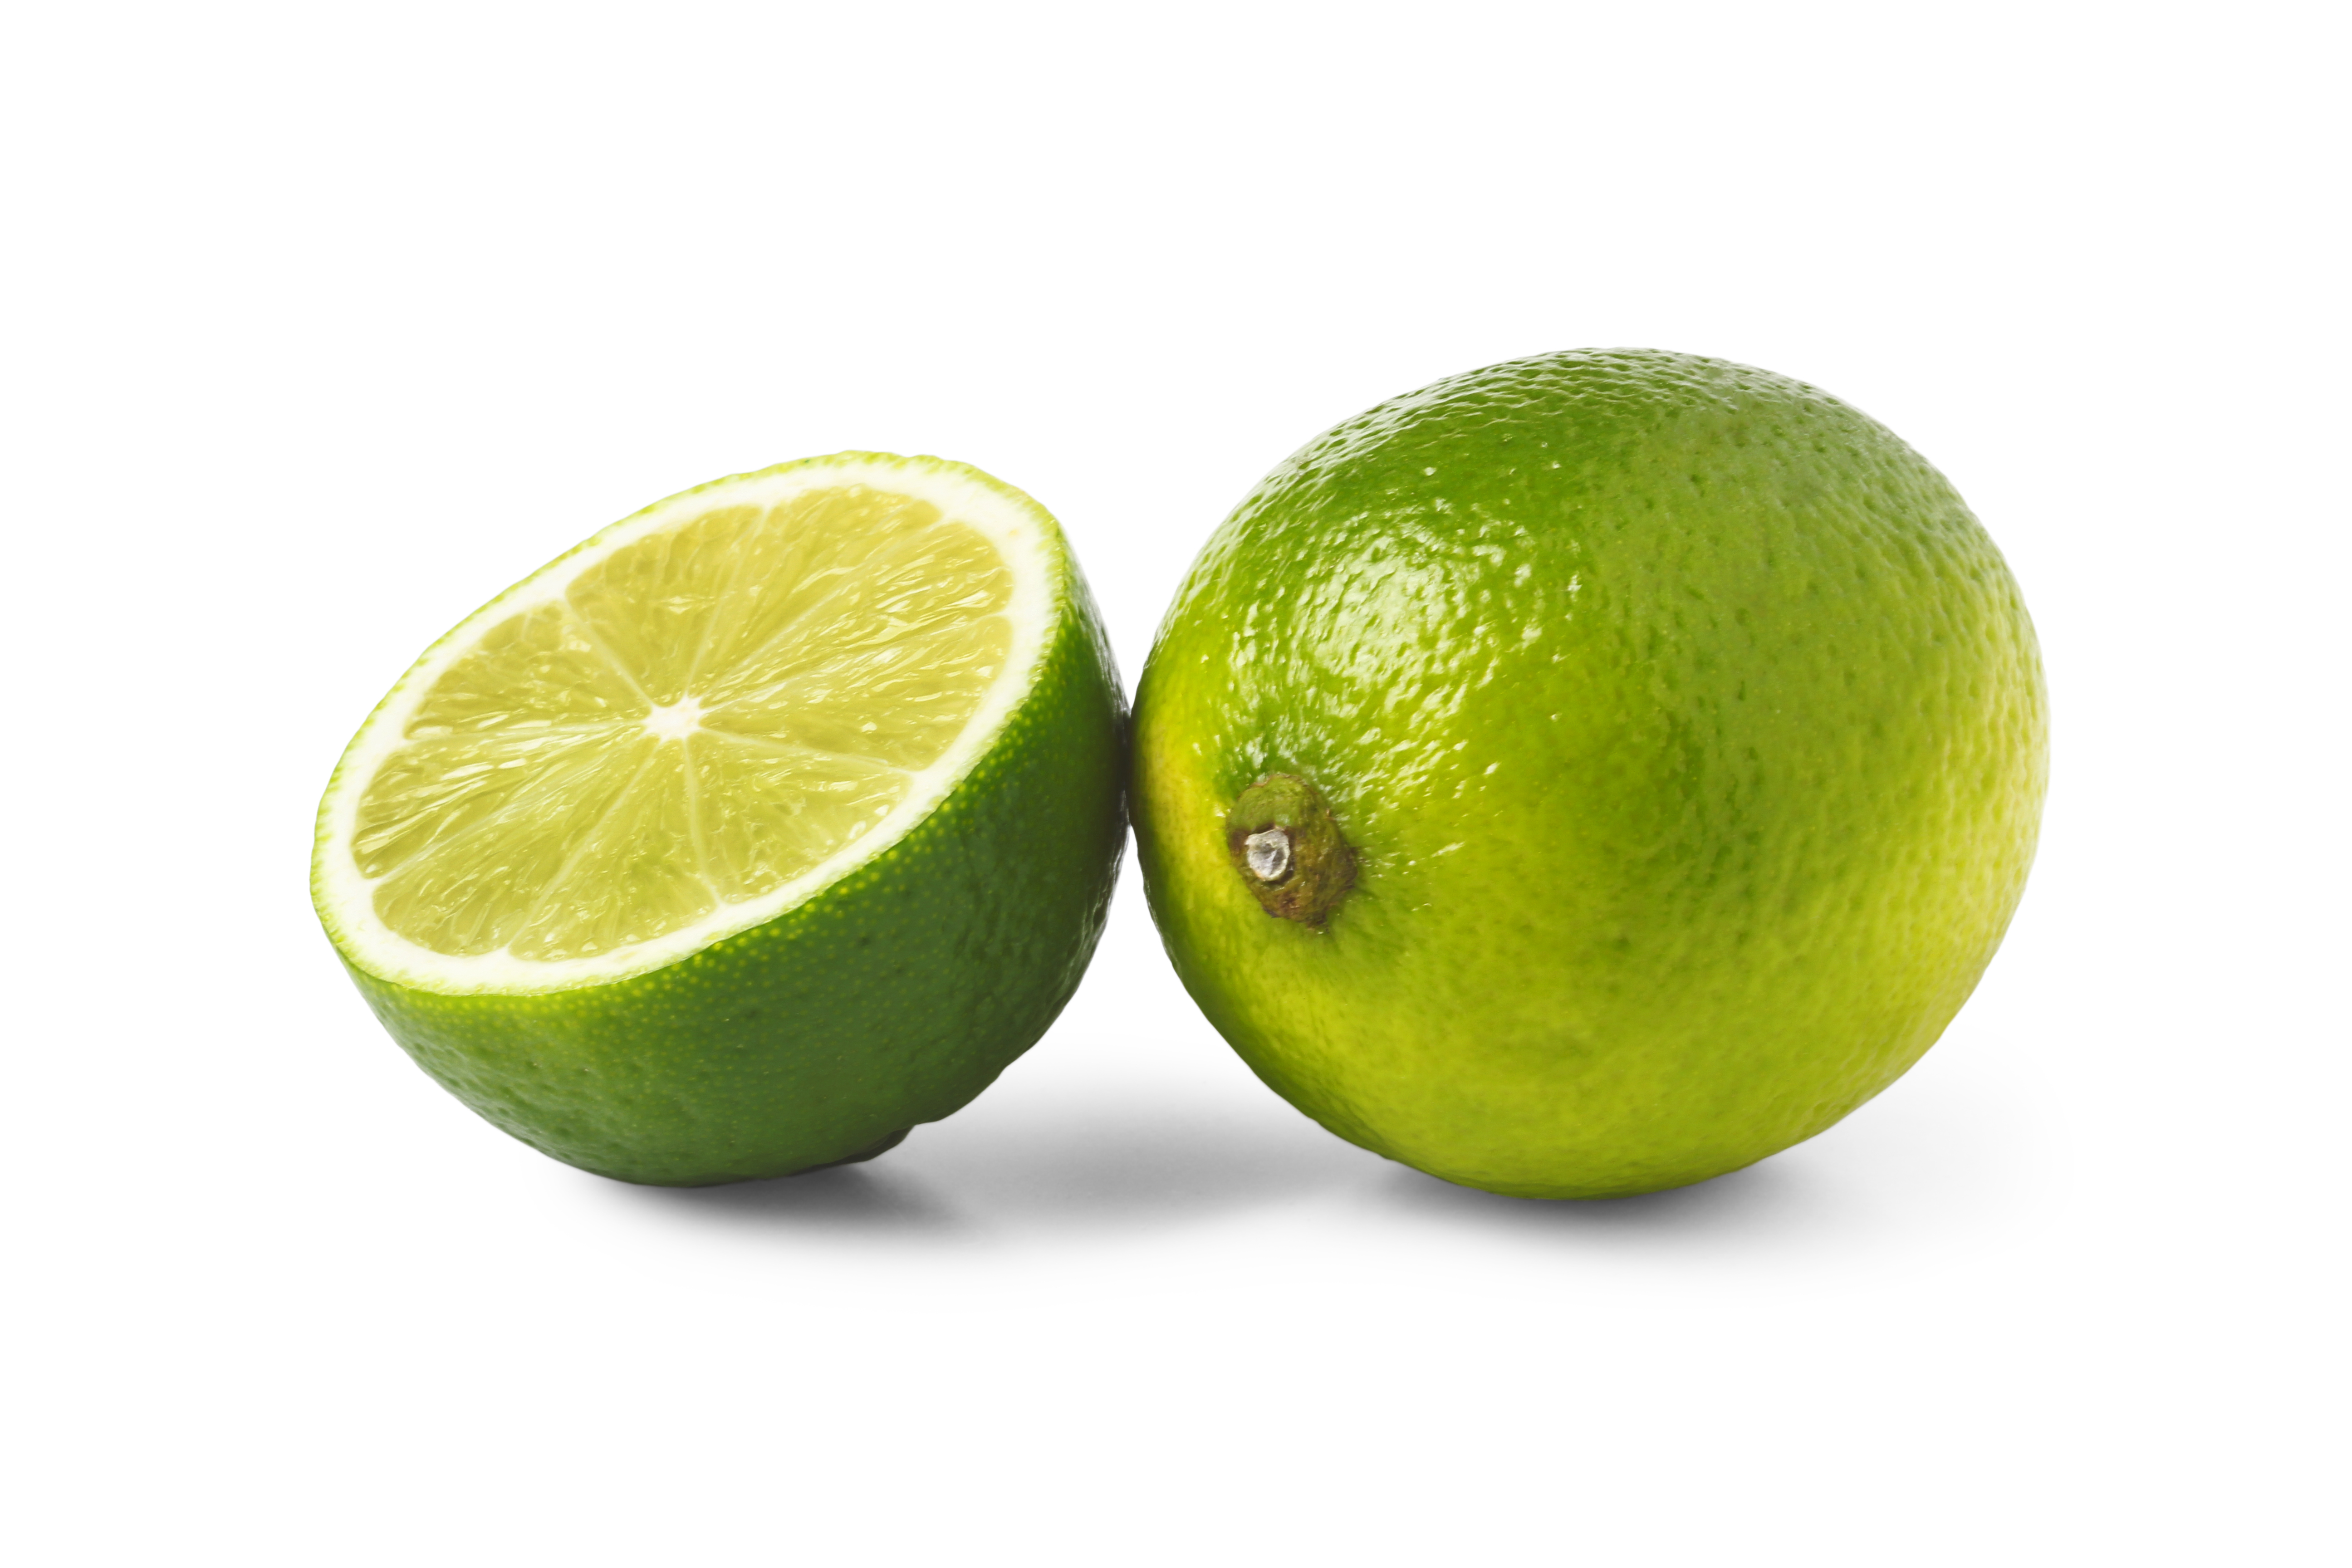 A lime. | Source: Getty Images